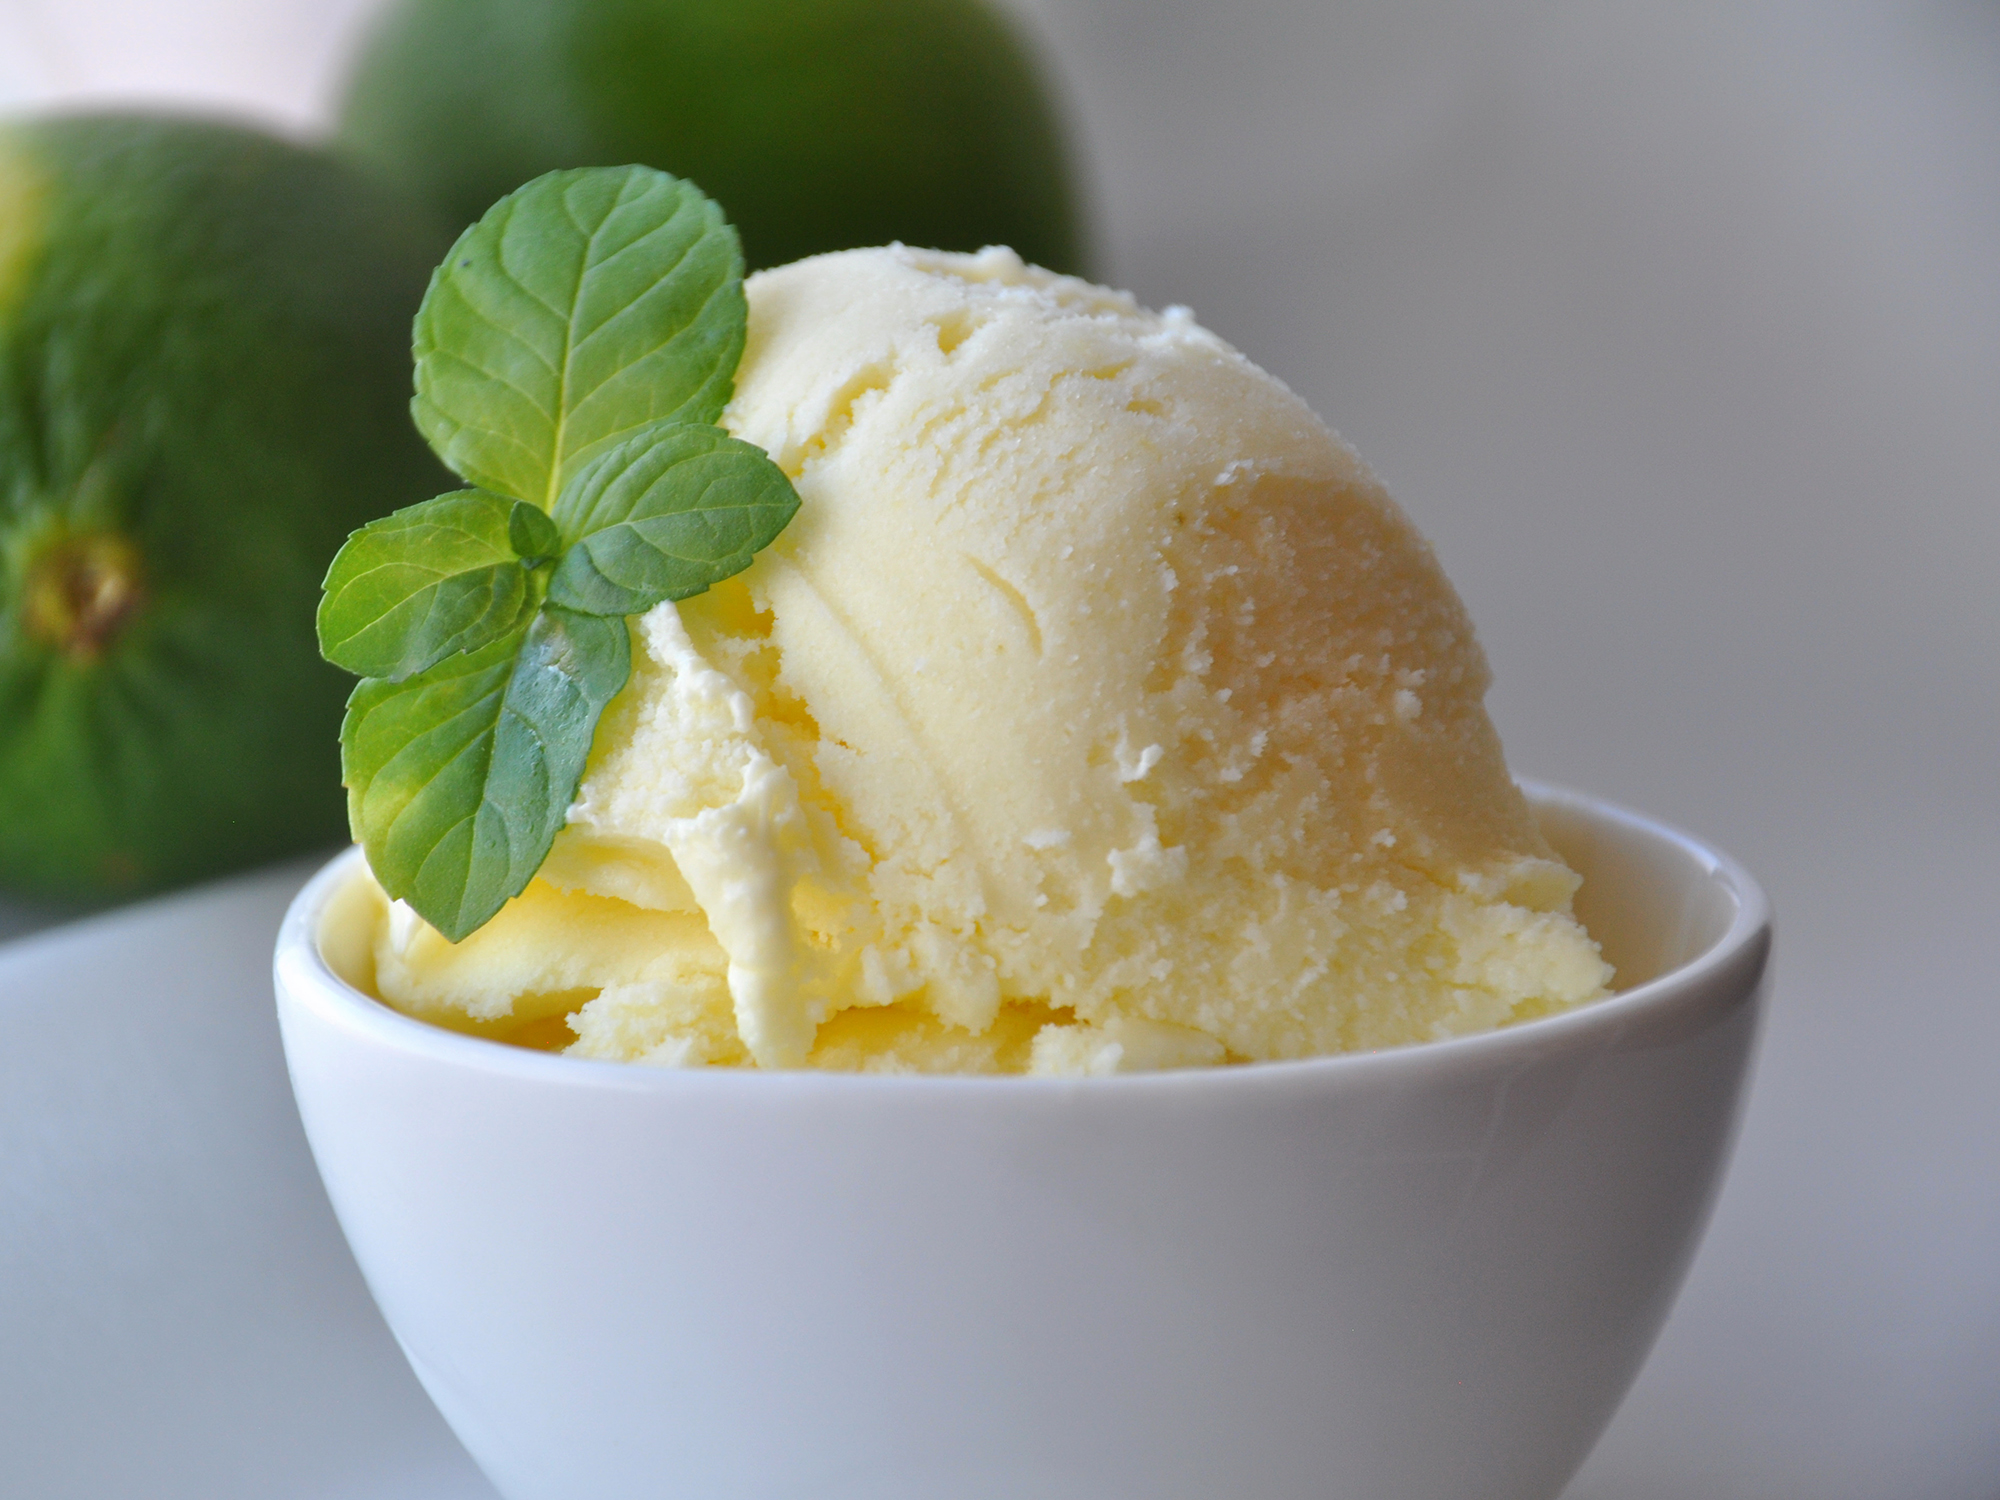 close up view of a scoop of Key Lime Ice Cream, garnished with fresh mint, in a white bowl